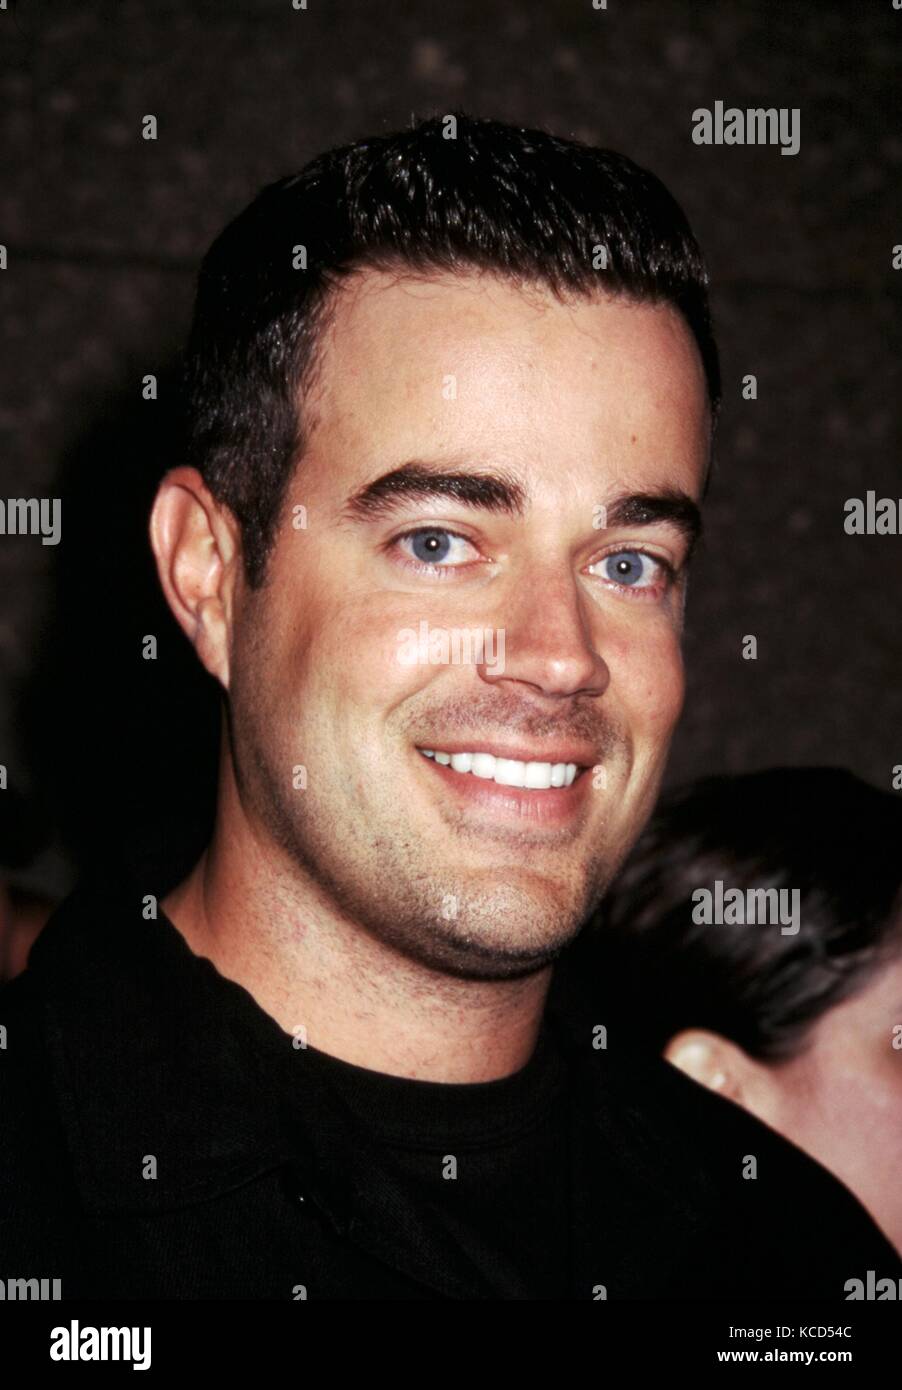 Carson Daly of 'Last Call with Carson Daly' 2002 NBC Primetime Preview Radio City Music Hall, NYC May 13, 2002 © Joseph Marzullo / MediaPunch. Stock Photo